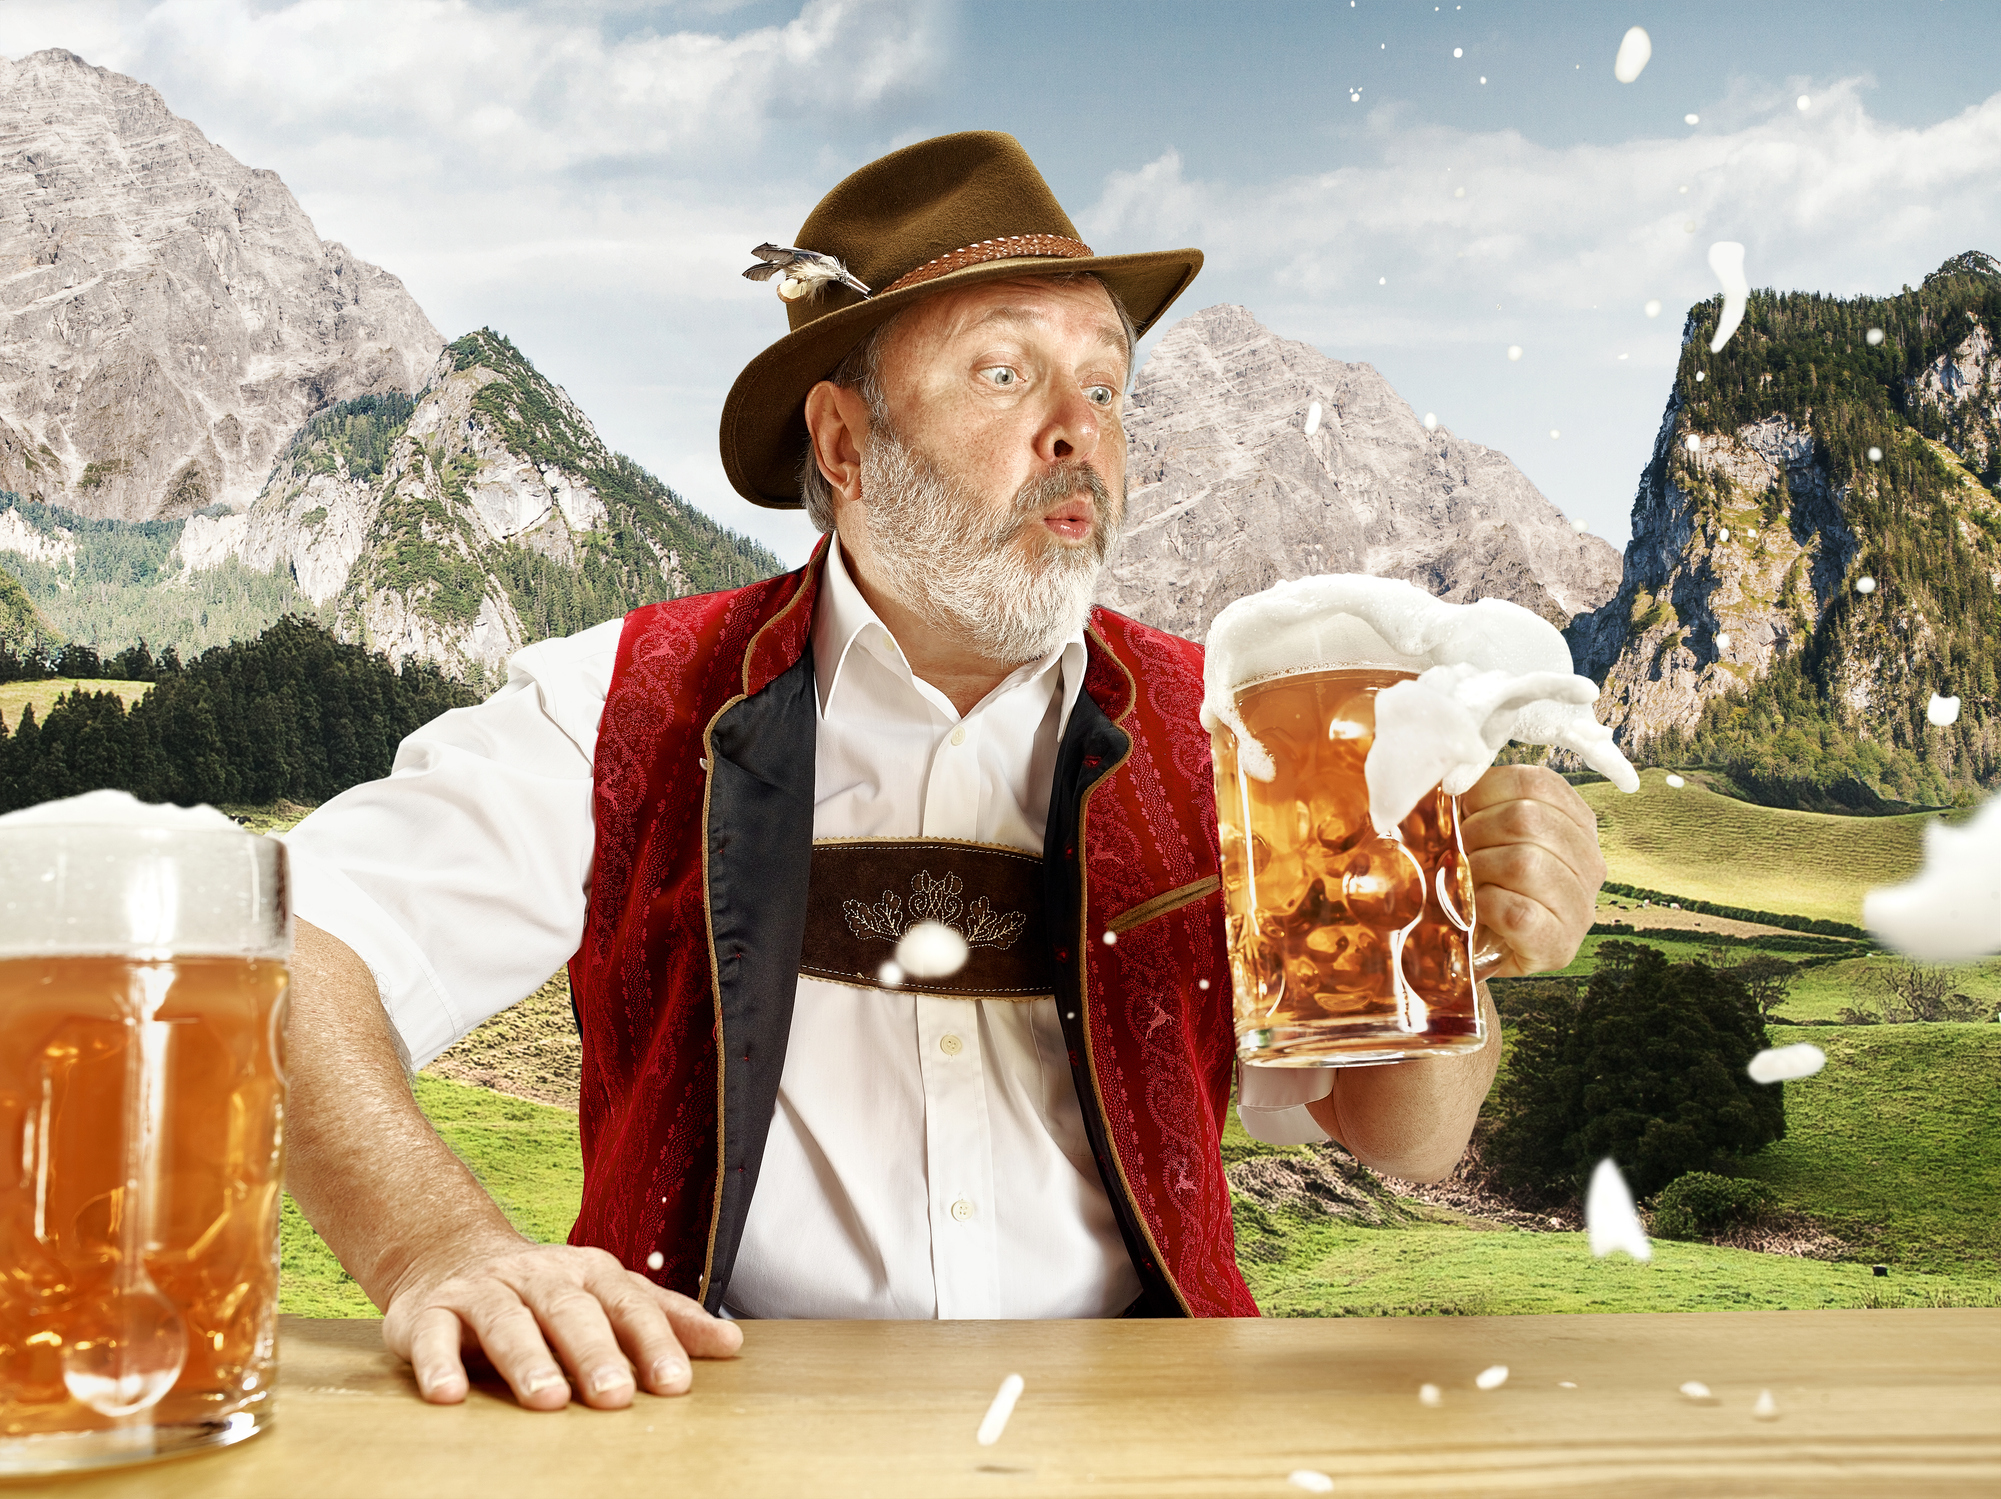 Germany, Bavaria, Upper Bavaria, man with beer dressed in traditional Austrian or Bavarian costume